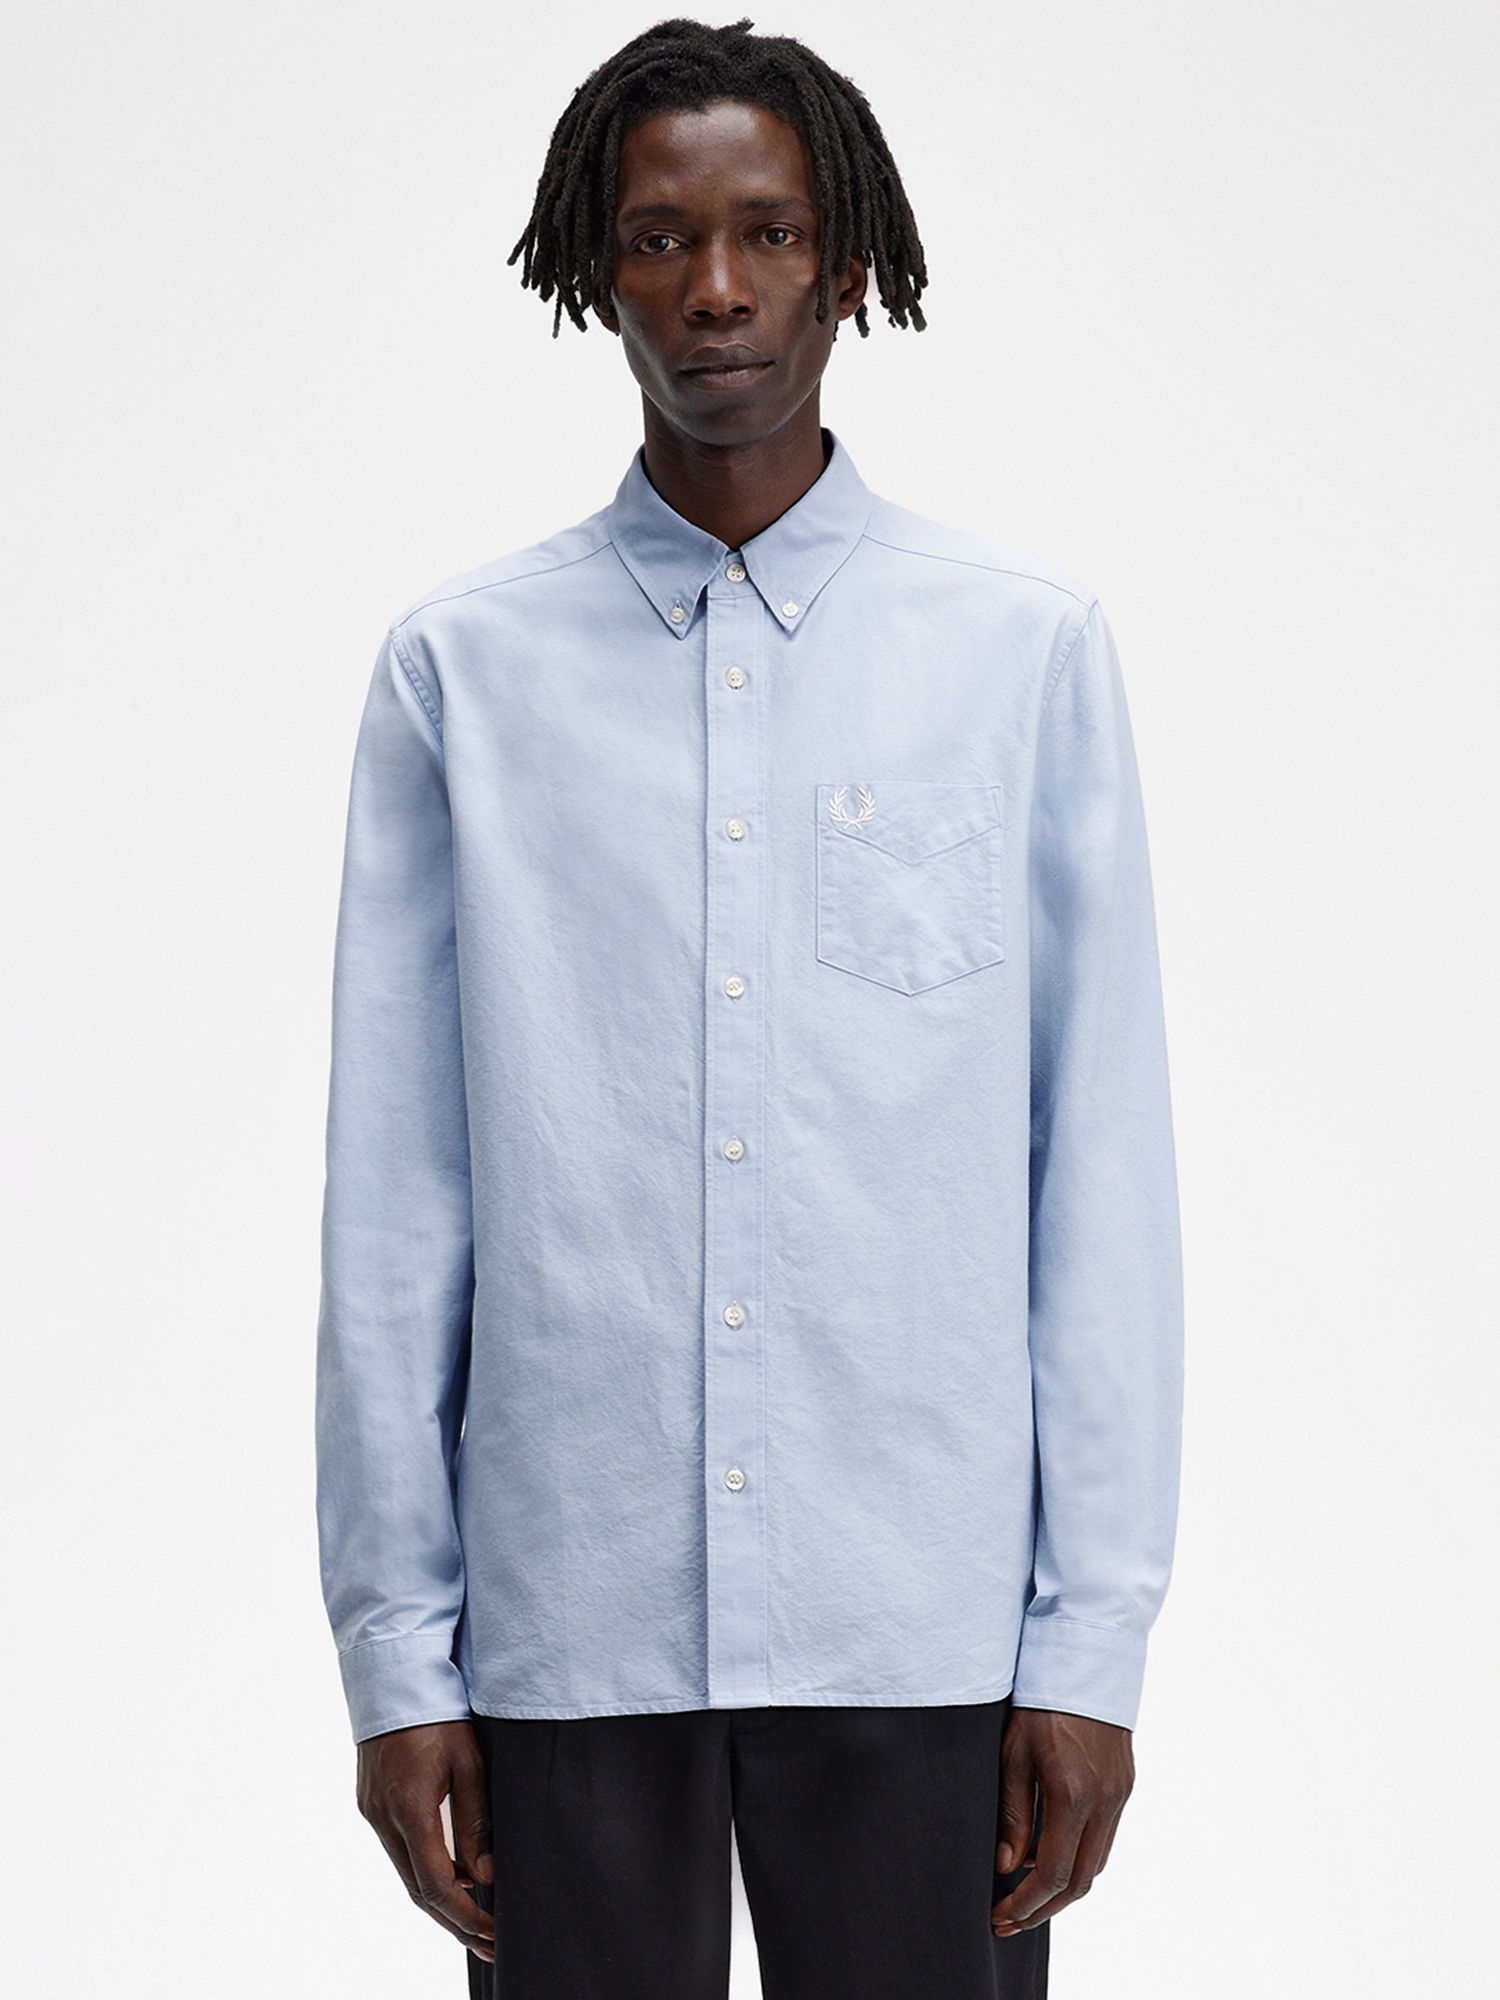 Fred Perry Oxford Shirt, 146 Blue, S